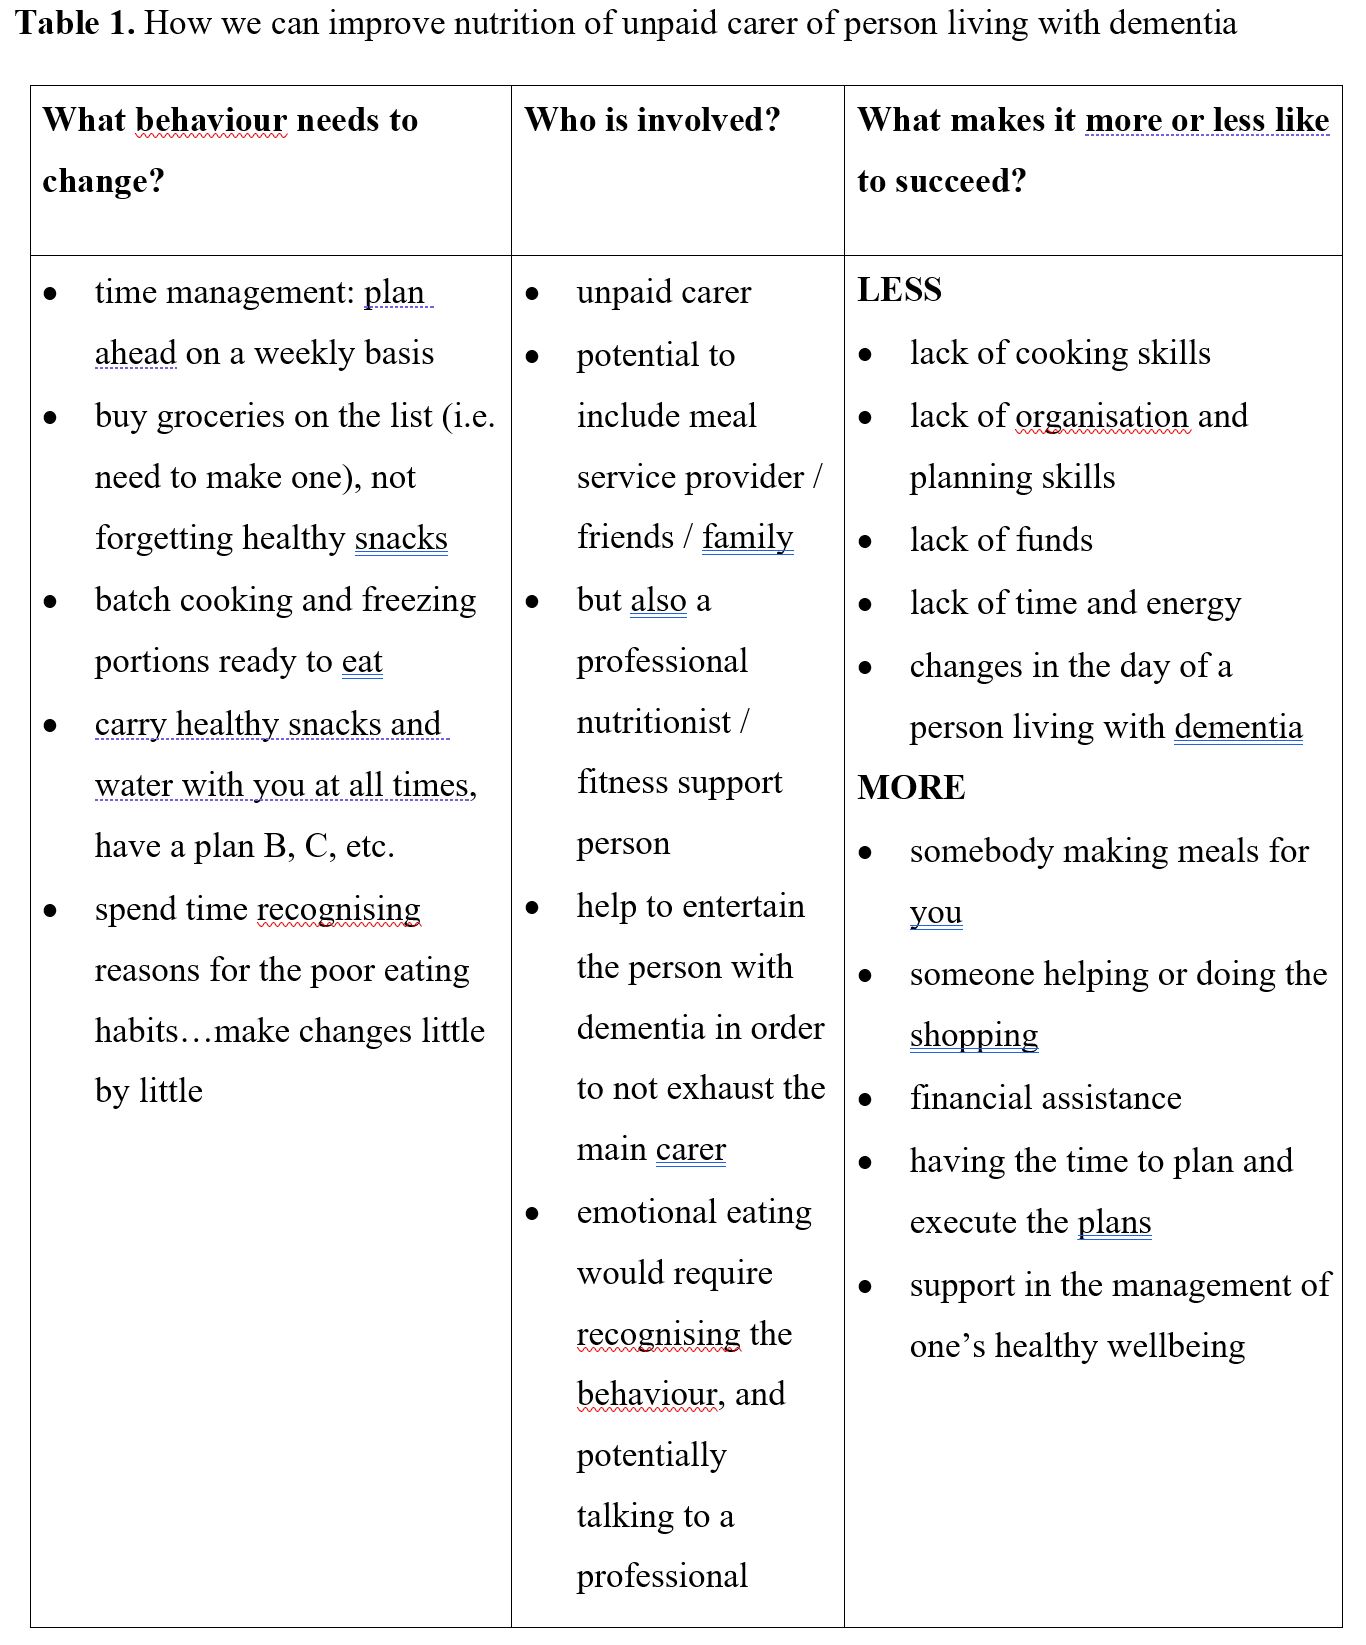 a table describing How we can improve nutrition of unpaid carer of person living with dementia